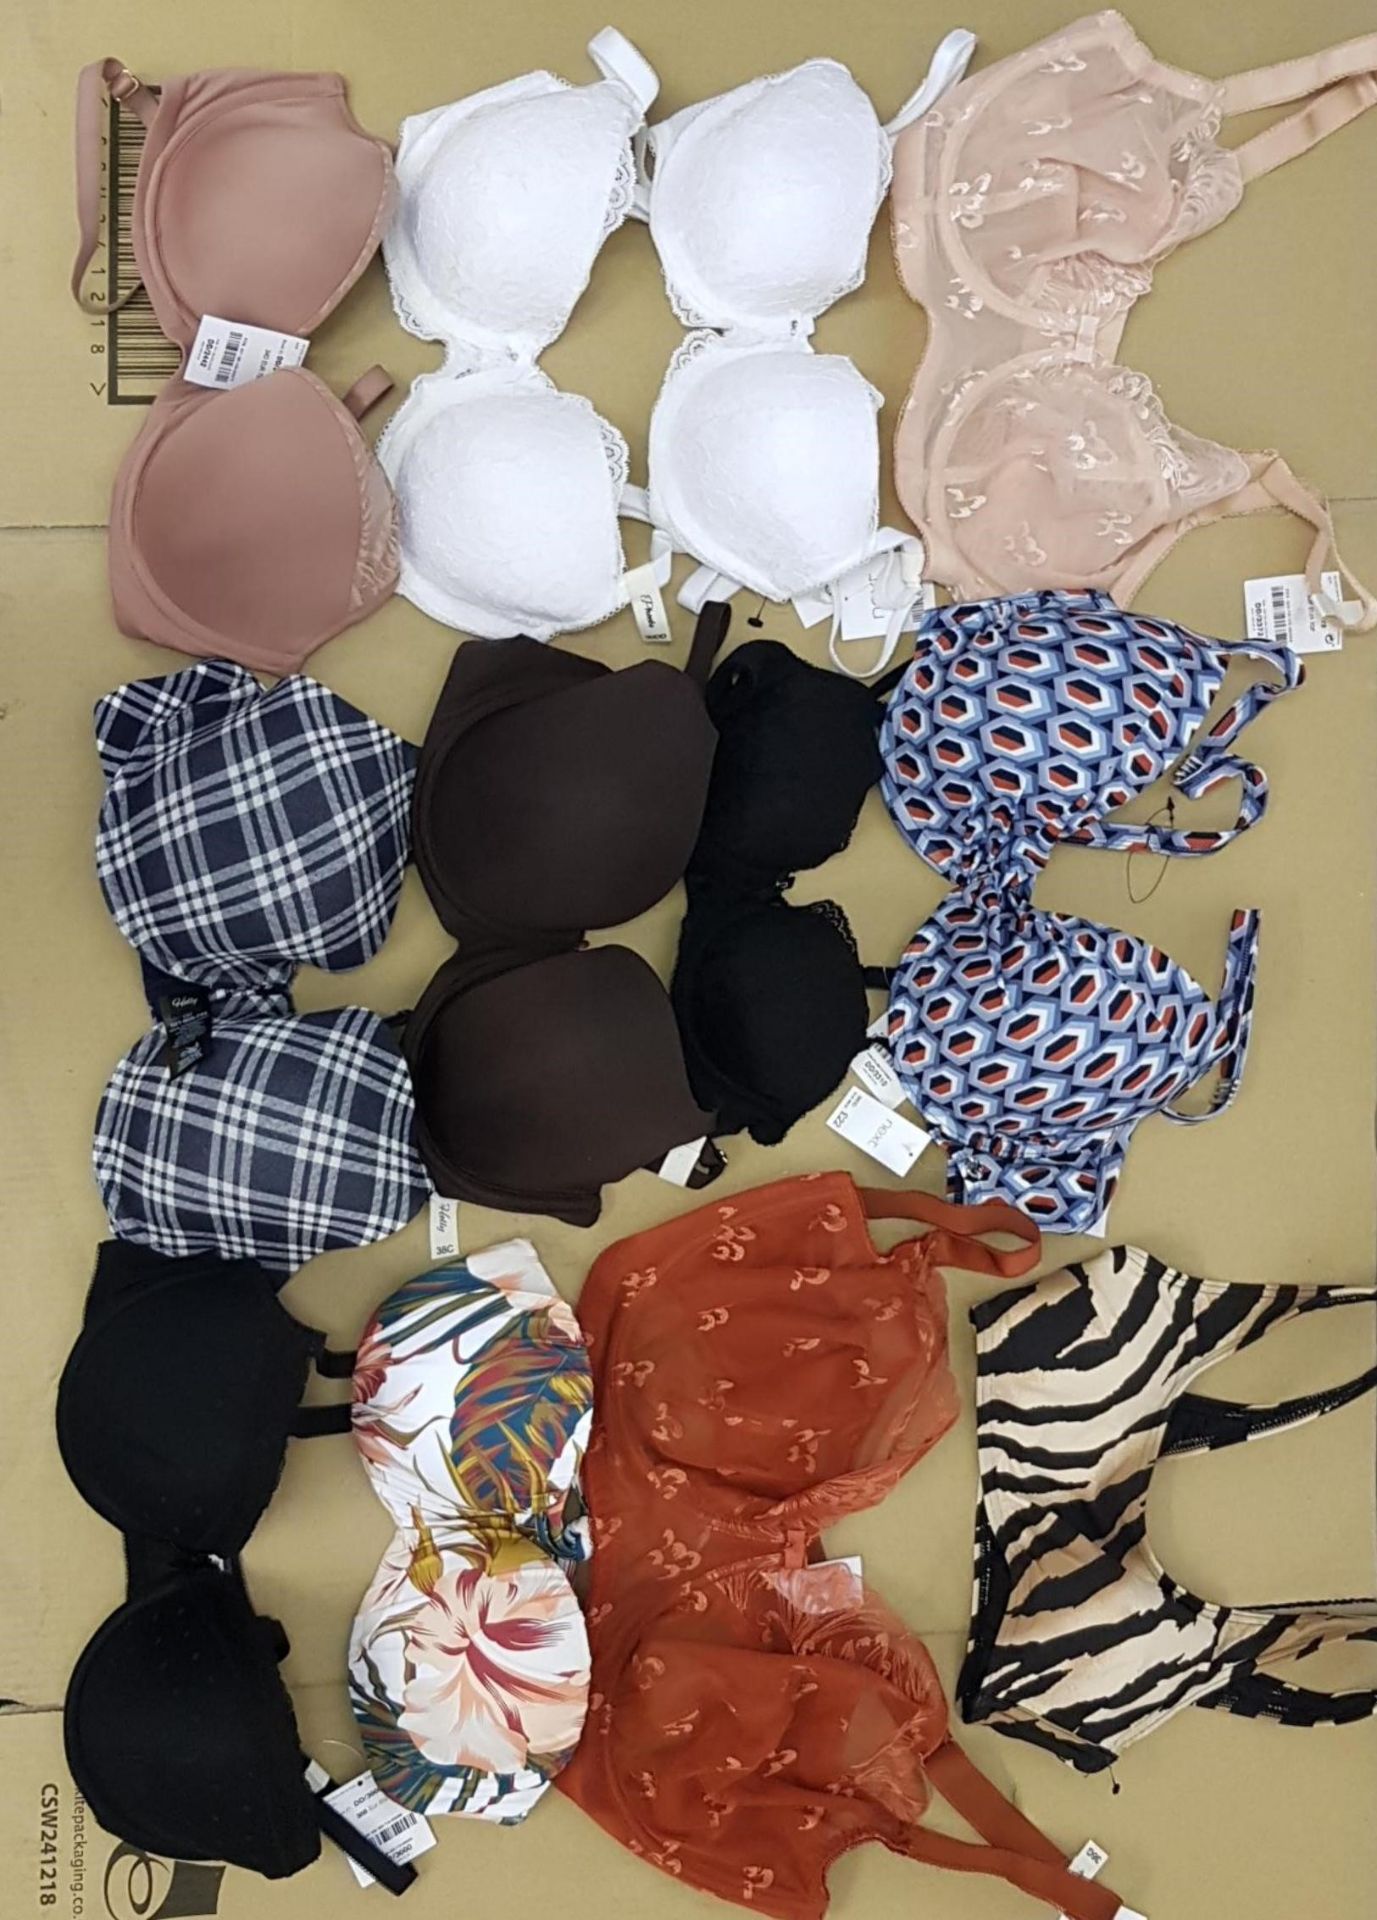 ONE LOT TO CONTAIN 12 ITEMS - WOMENS MIXED BRA LOT - RRP £220 (2001) - Image 2 of 2